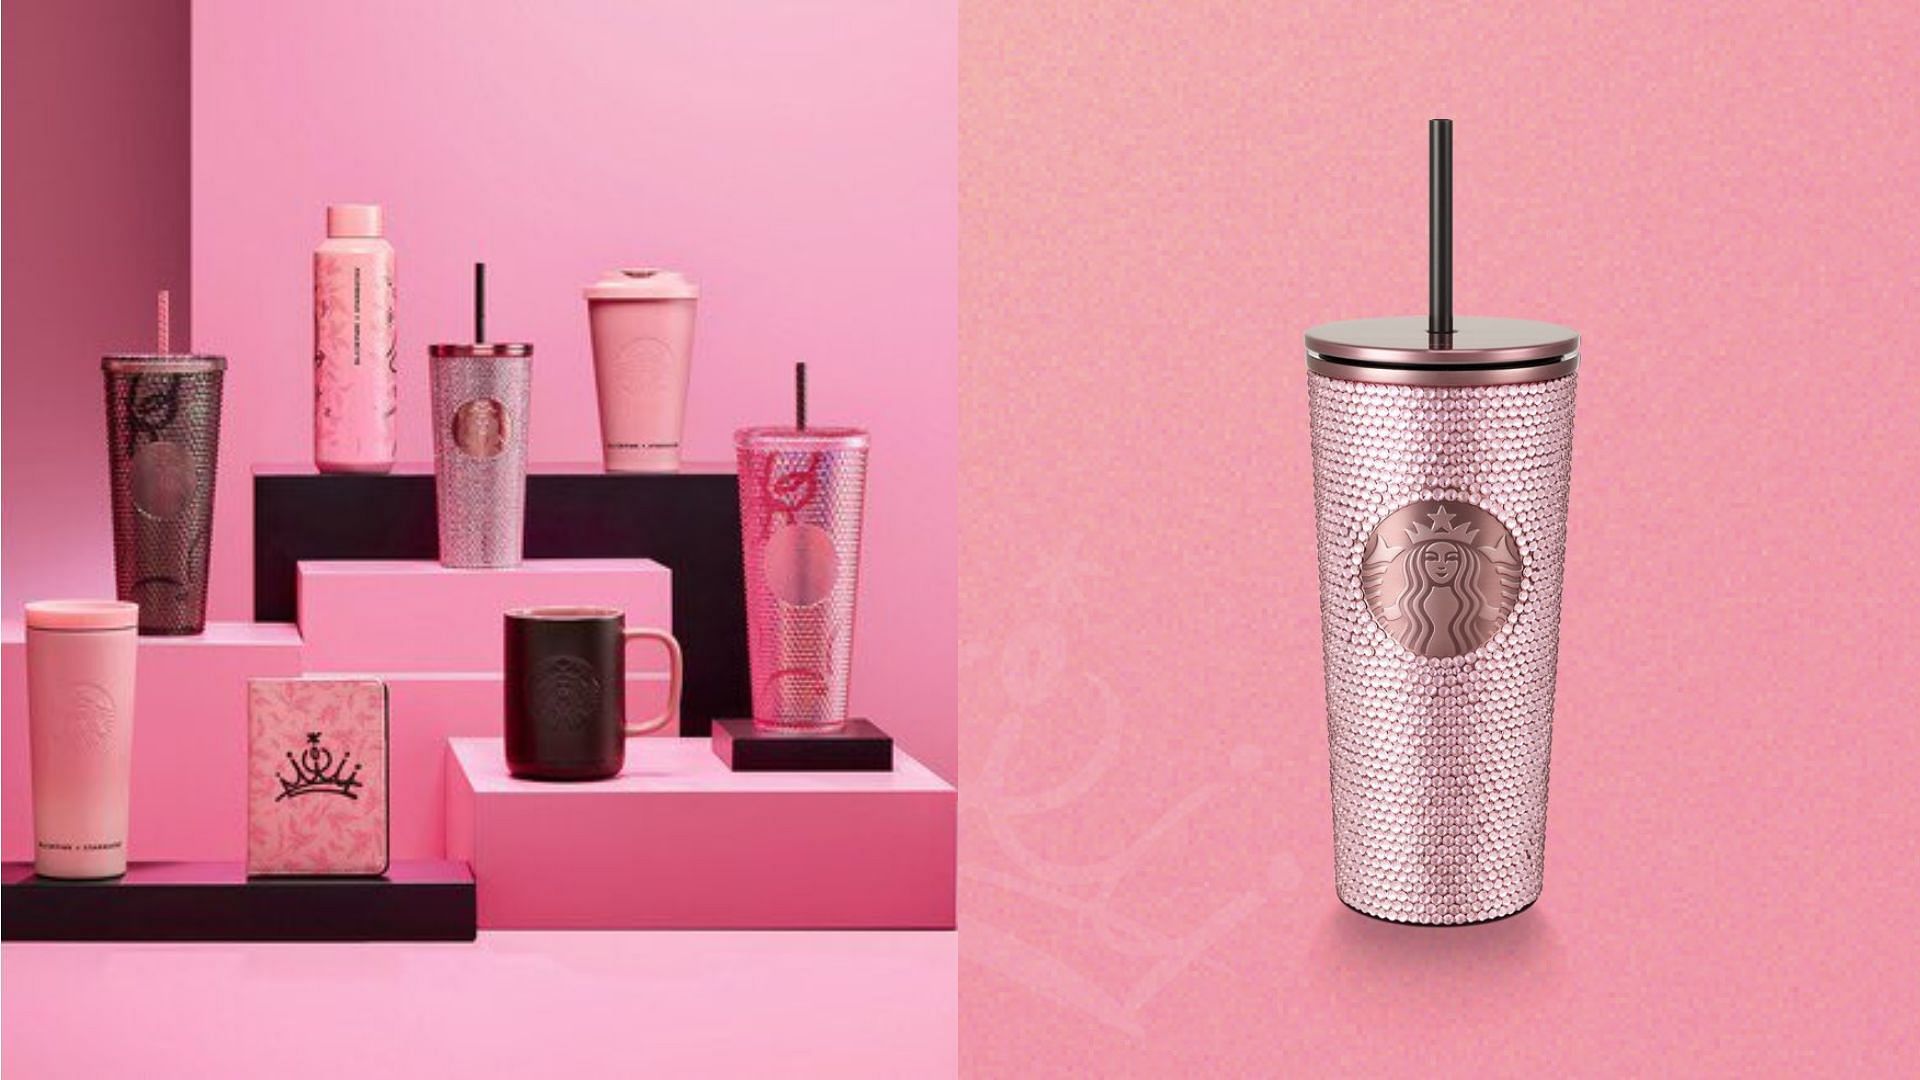 Fans find the pink rhinestone tumbler extremely costly in BLACKPINK